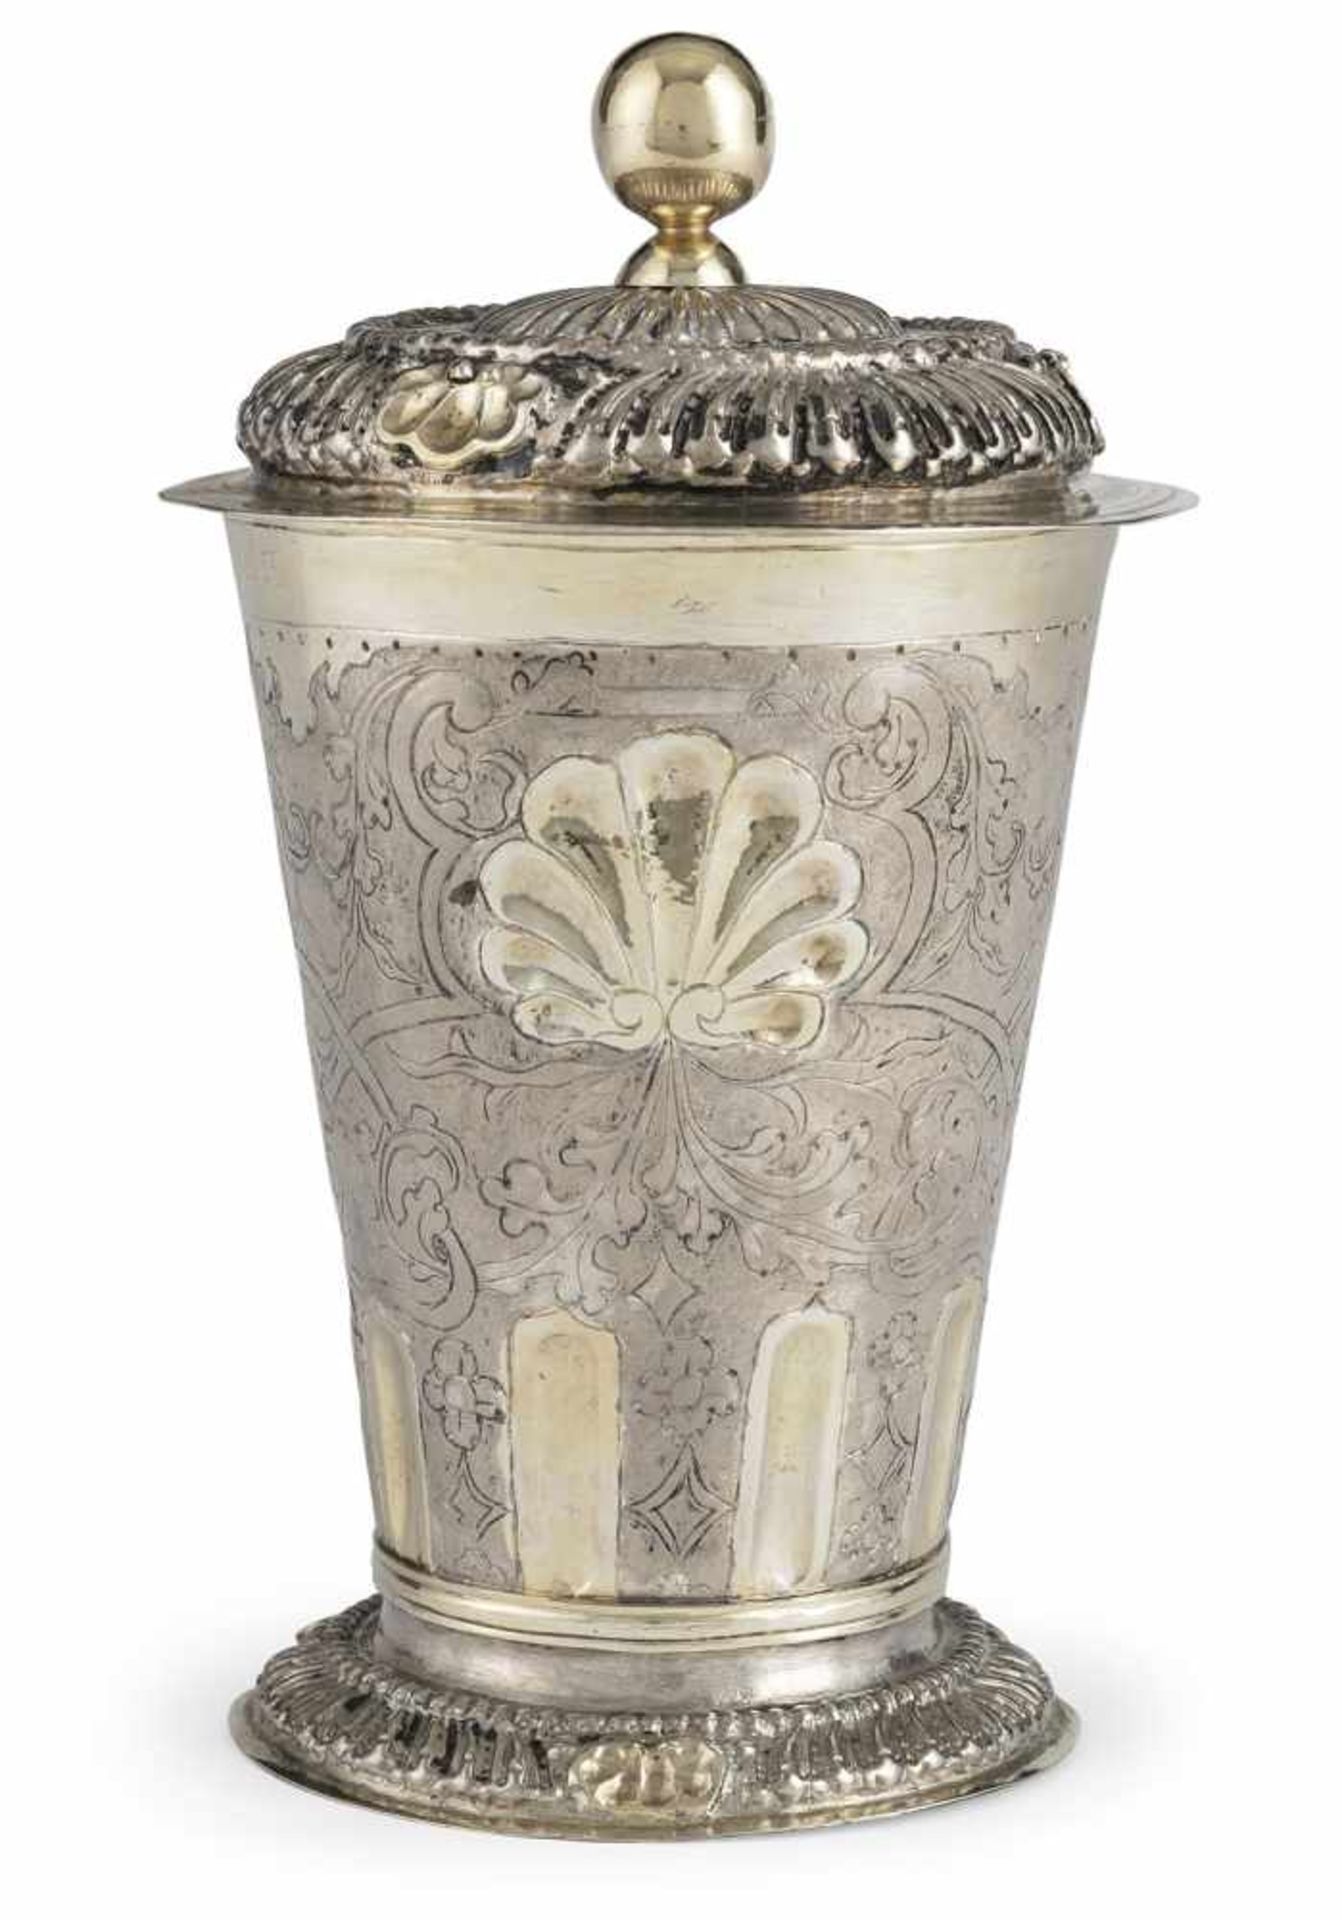 A SILESIAN BAROQUE SILVERGILT BEAKER AND COVER, c. 1720. Unidentified maker's mark "STM" at the